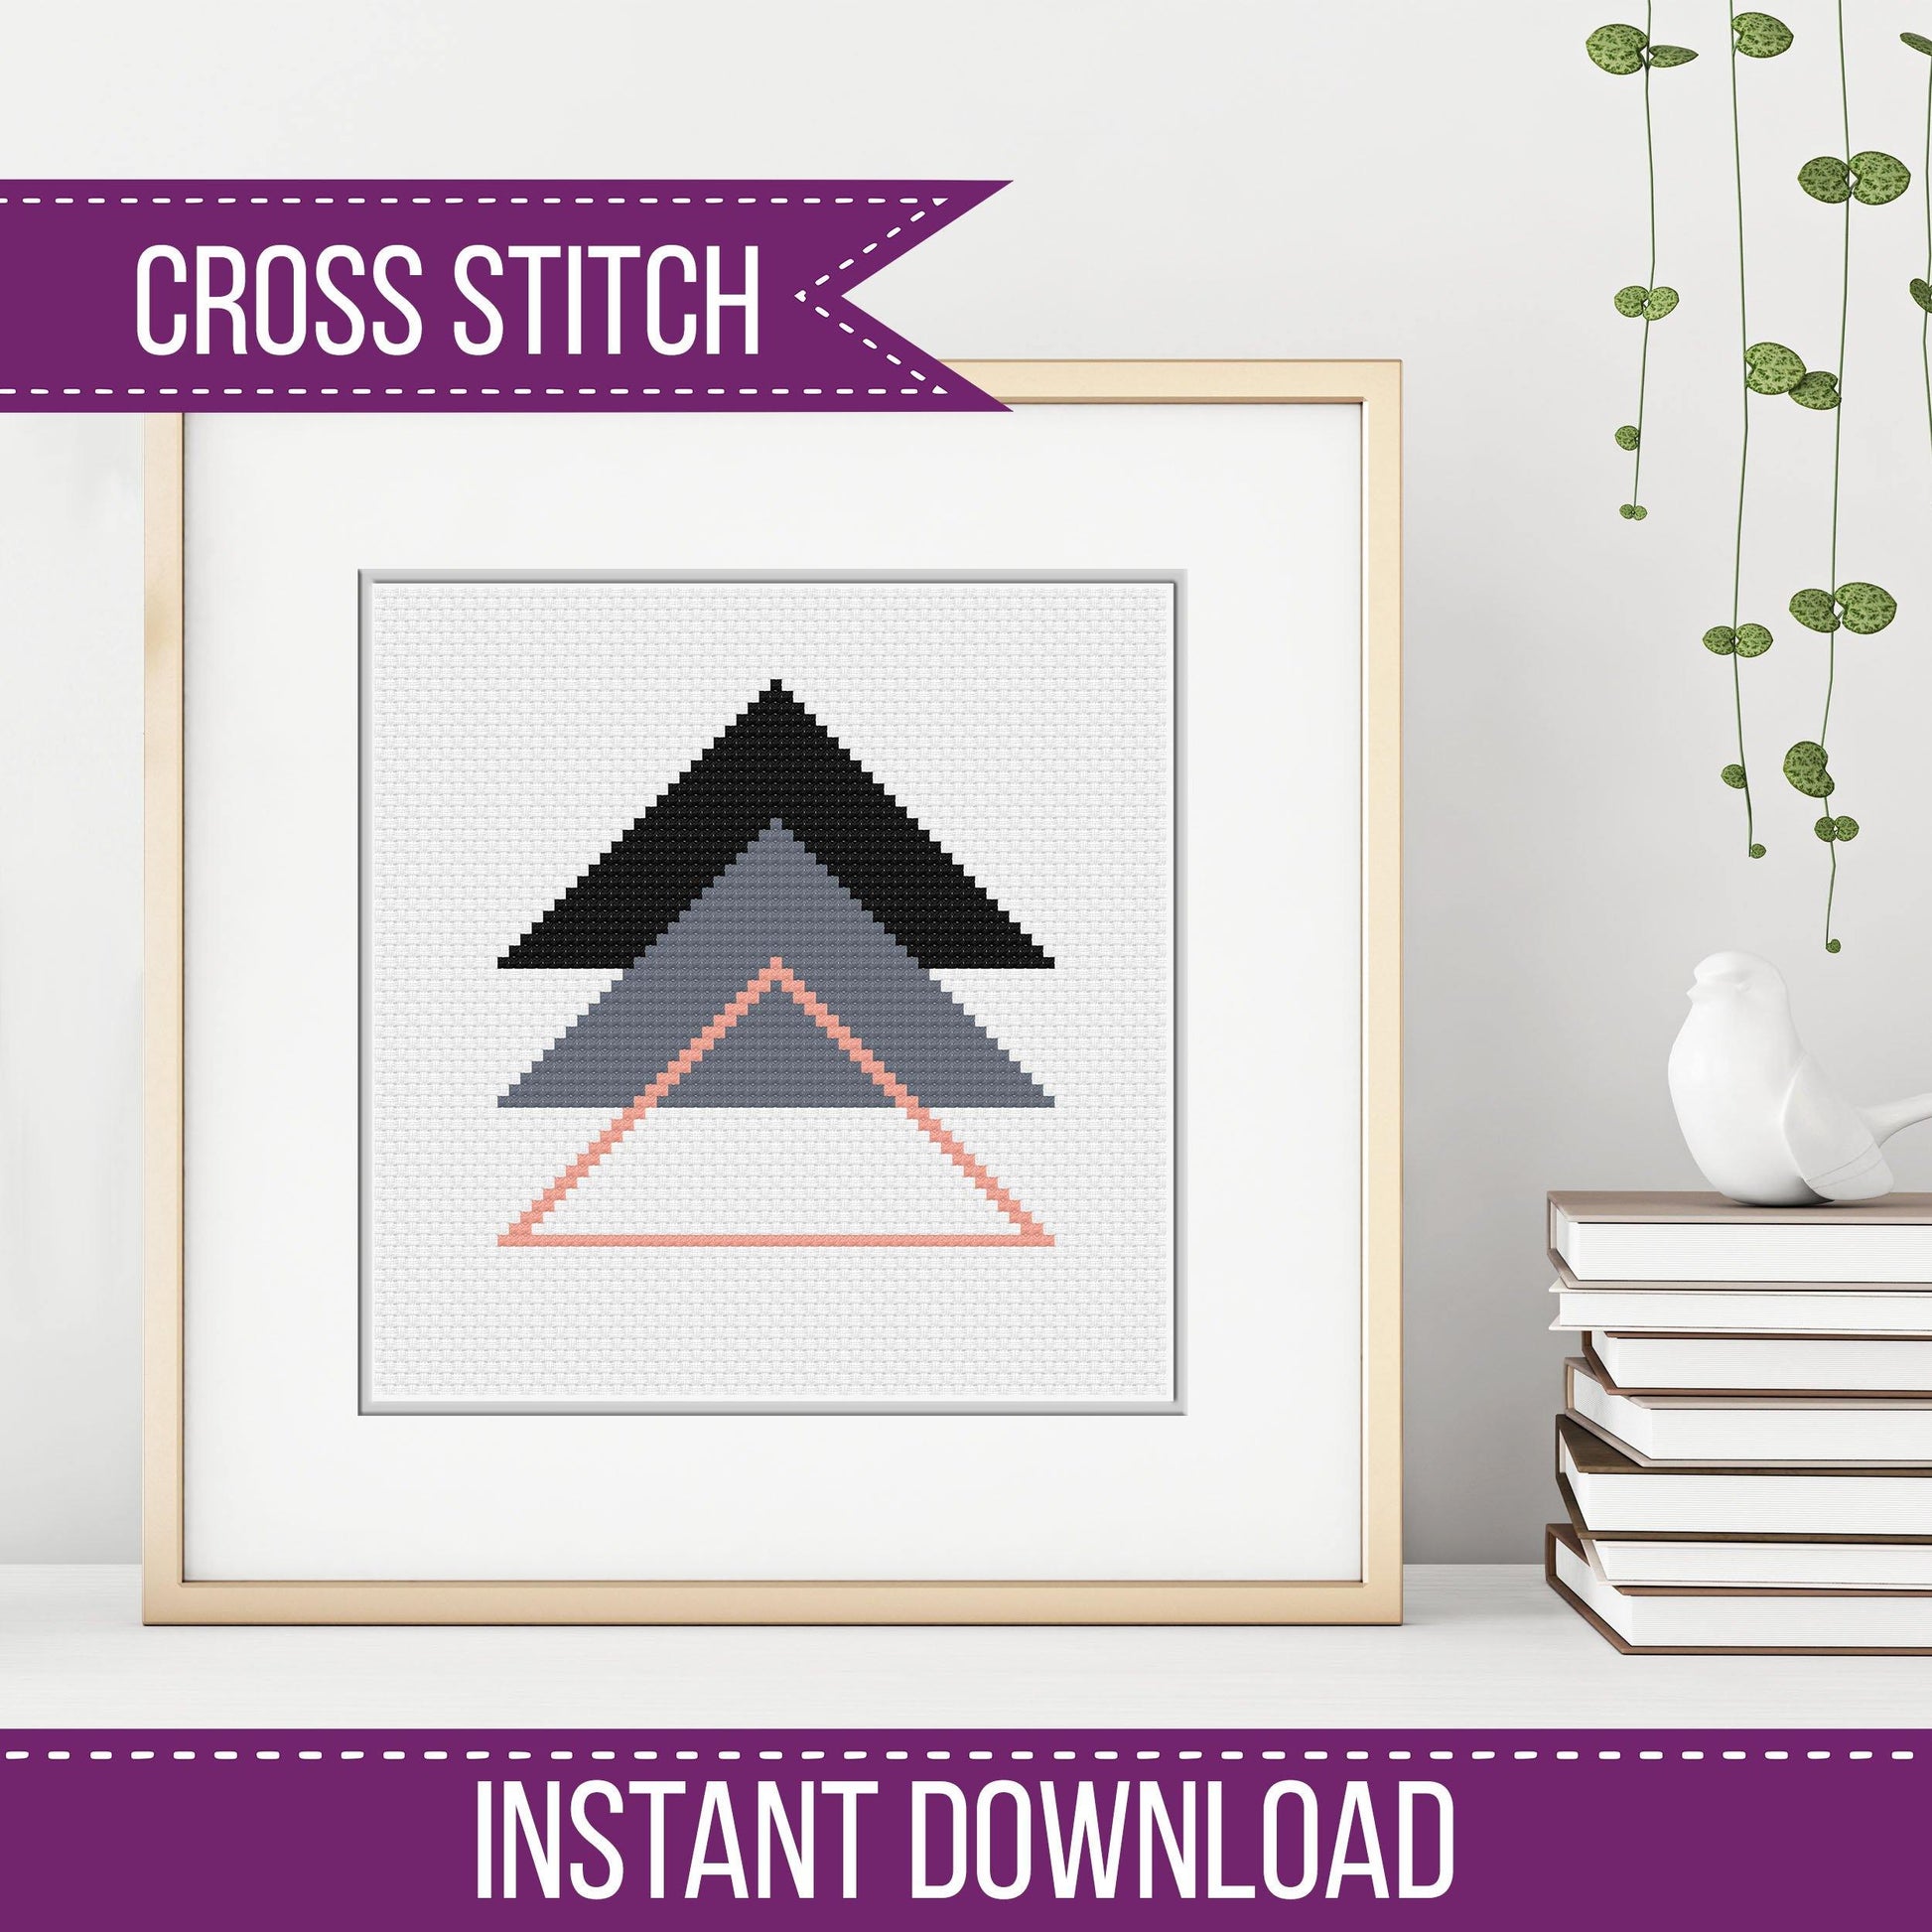 Abstract - Blackwork Patterns & Cross Stitch by Peppermint Purple